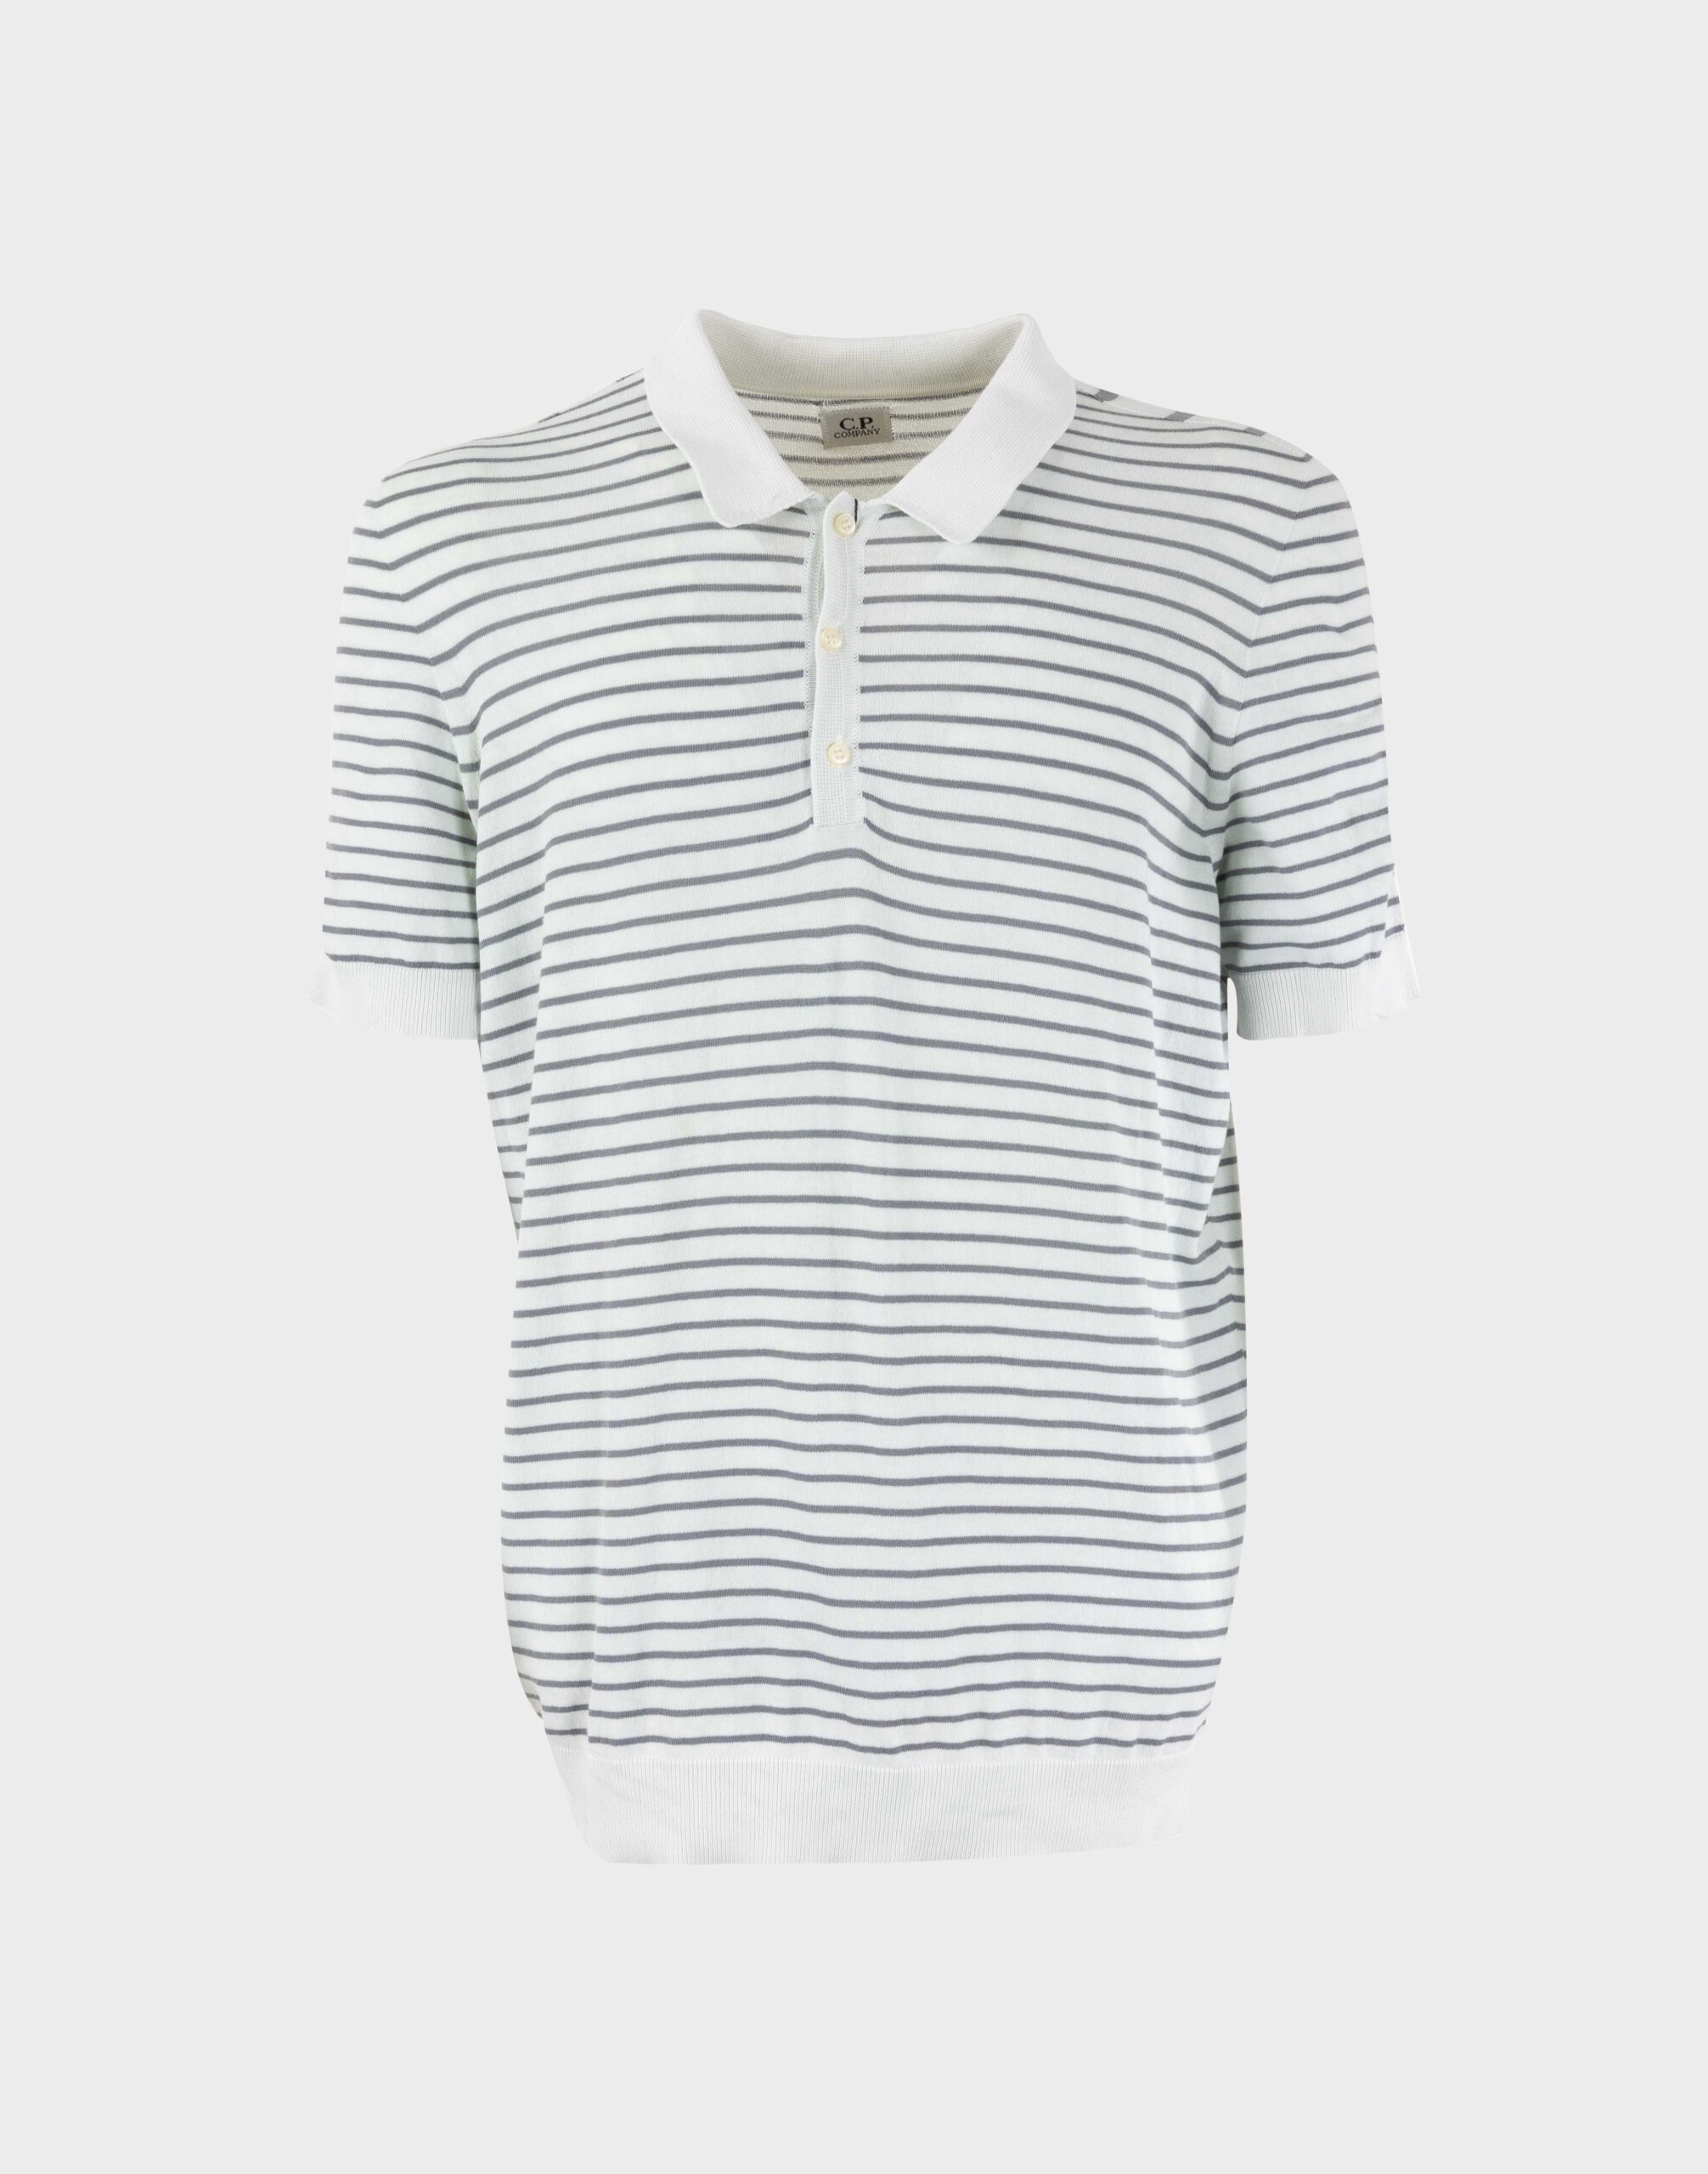 Men's cotton polo shirt with white and gray stripe pattern, short sleeves, and three buttons on the front